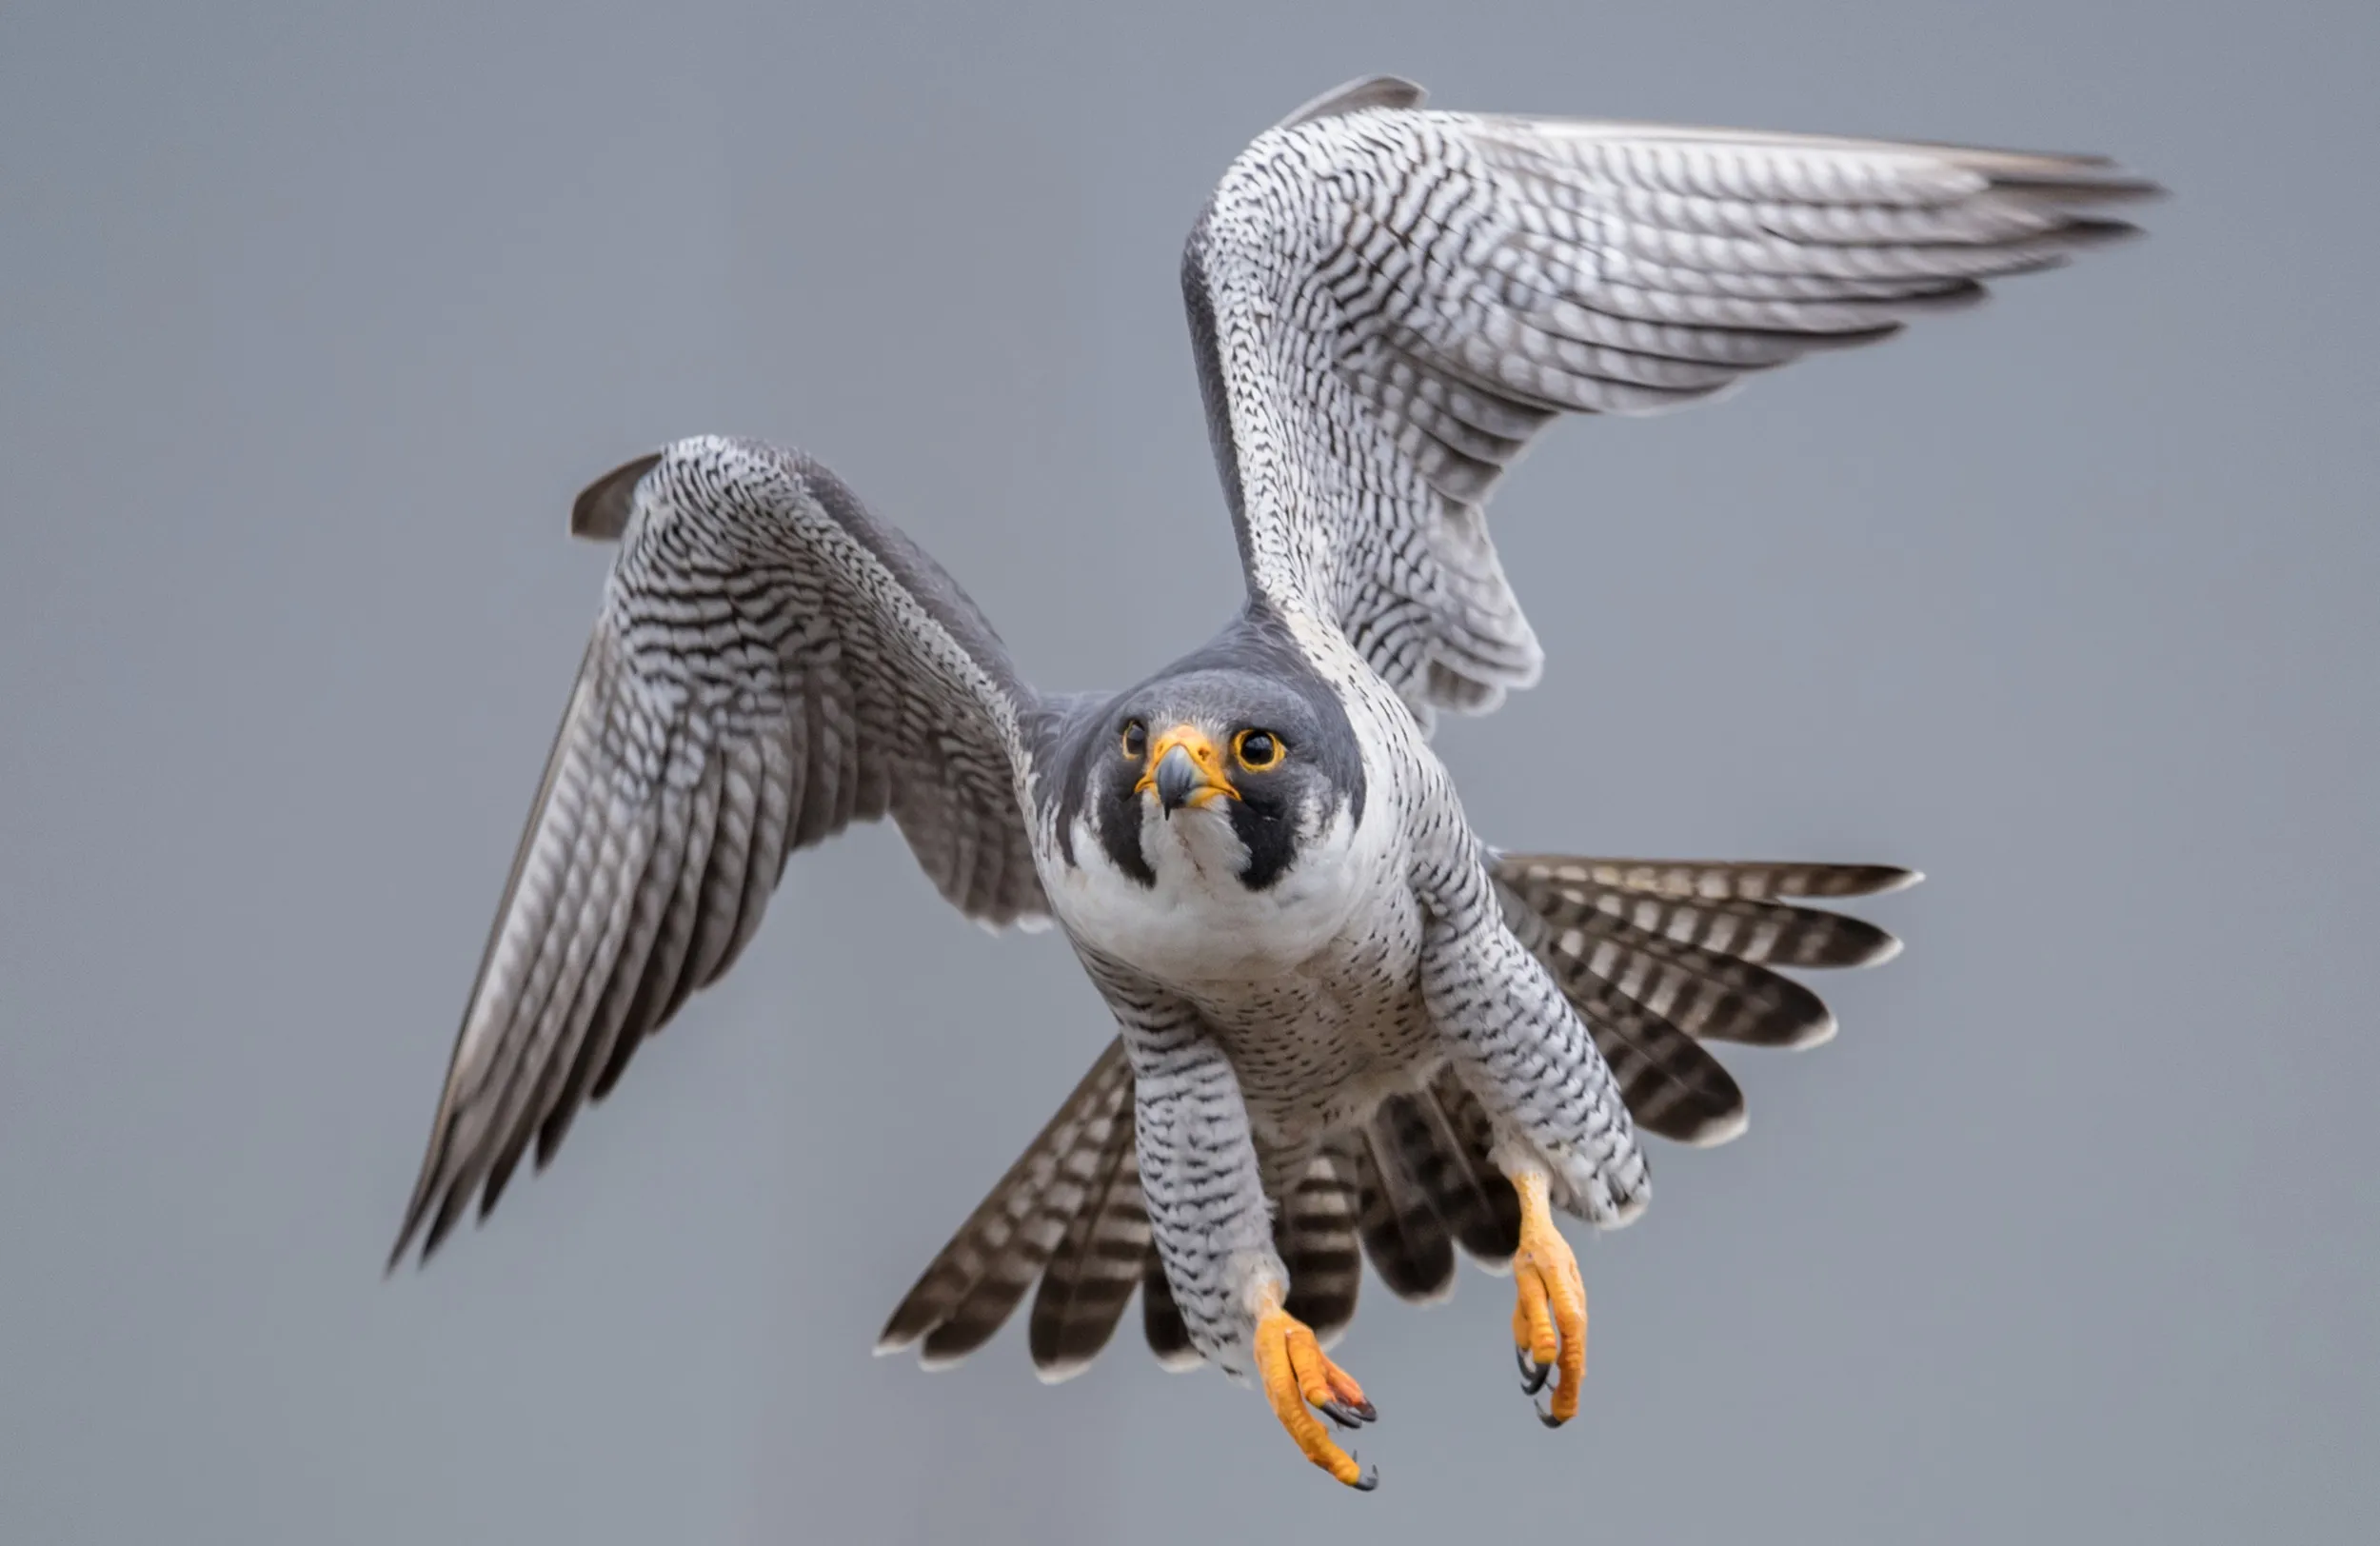 Peregrine Falcon flying with wings bent and feet down ready to land.